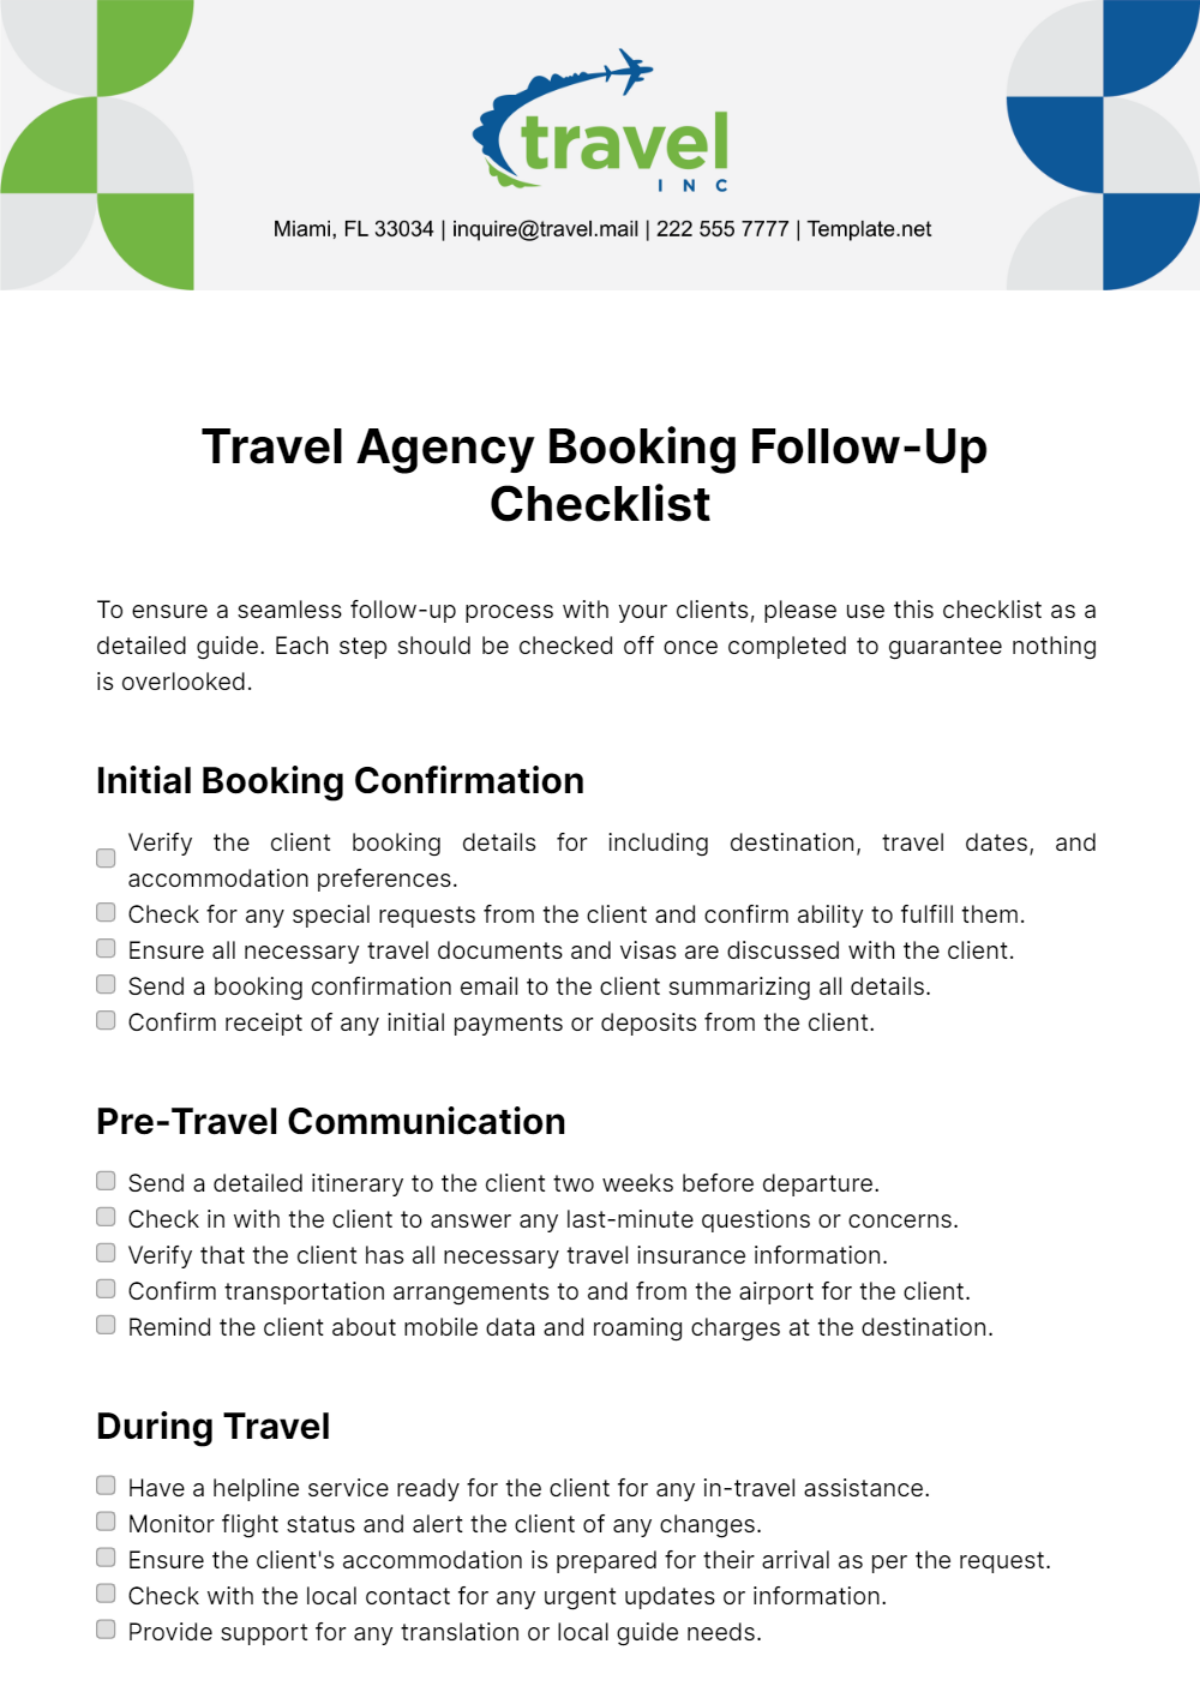 Travel Agency Booking Follow-Up Checklist Template